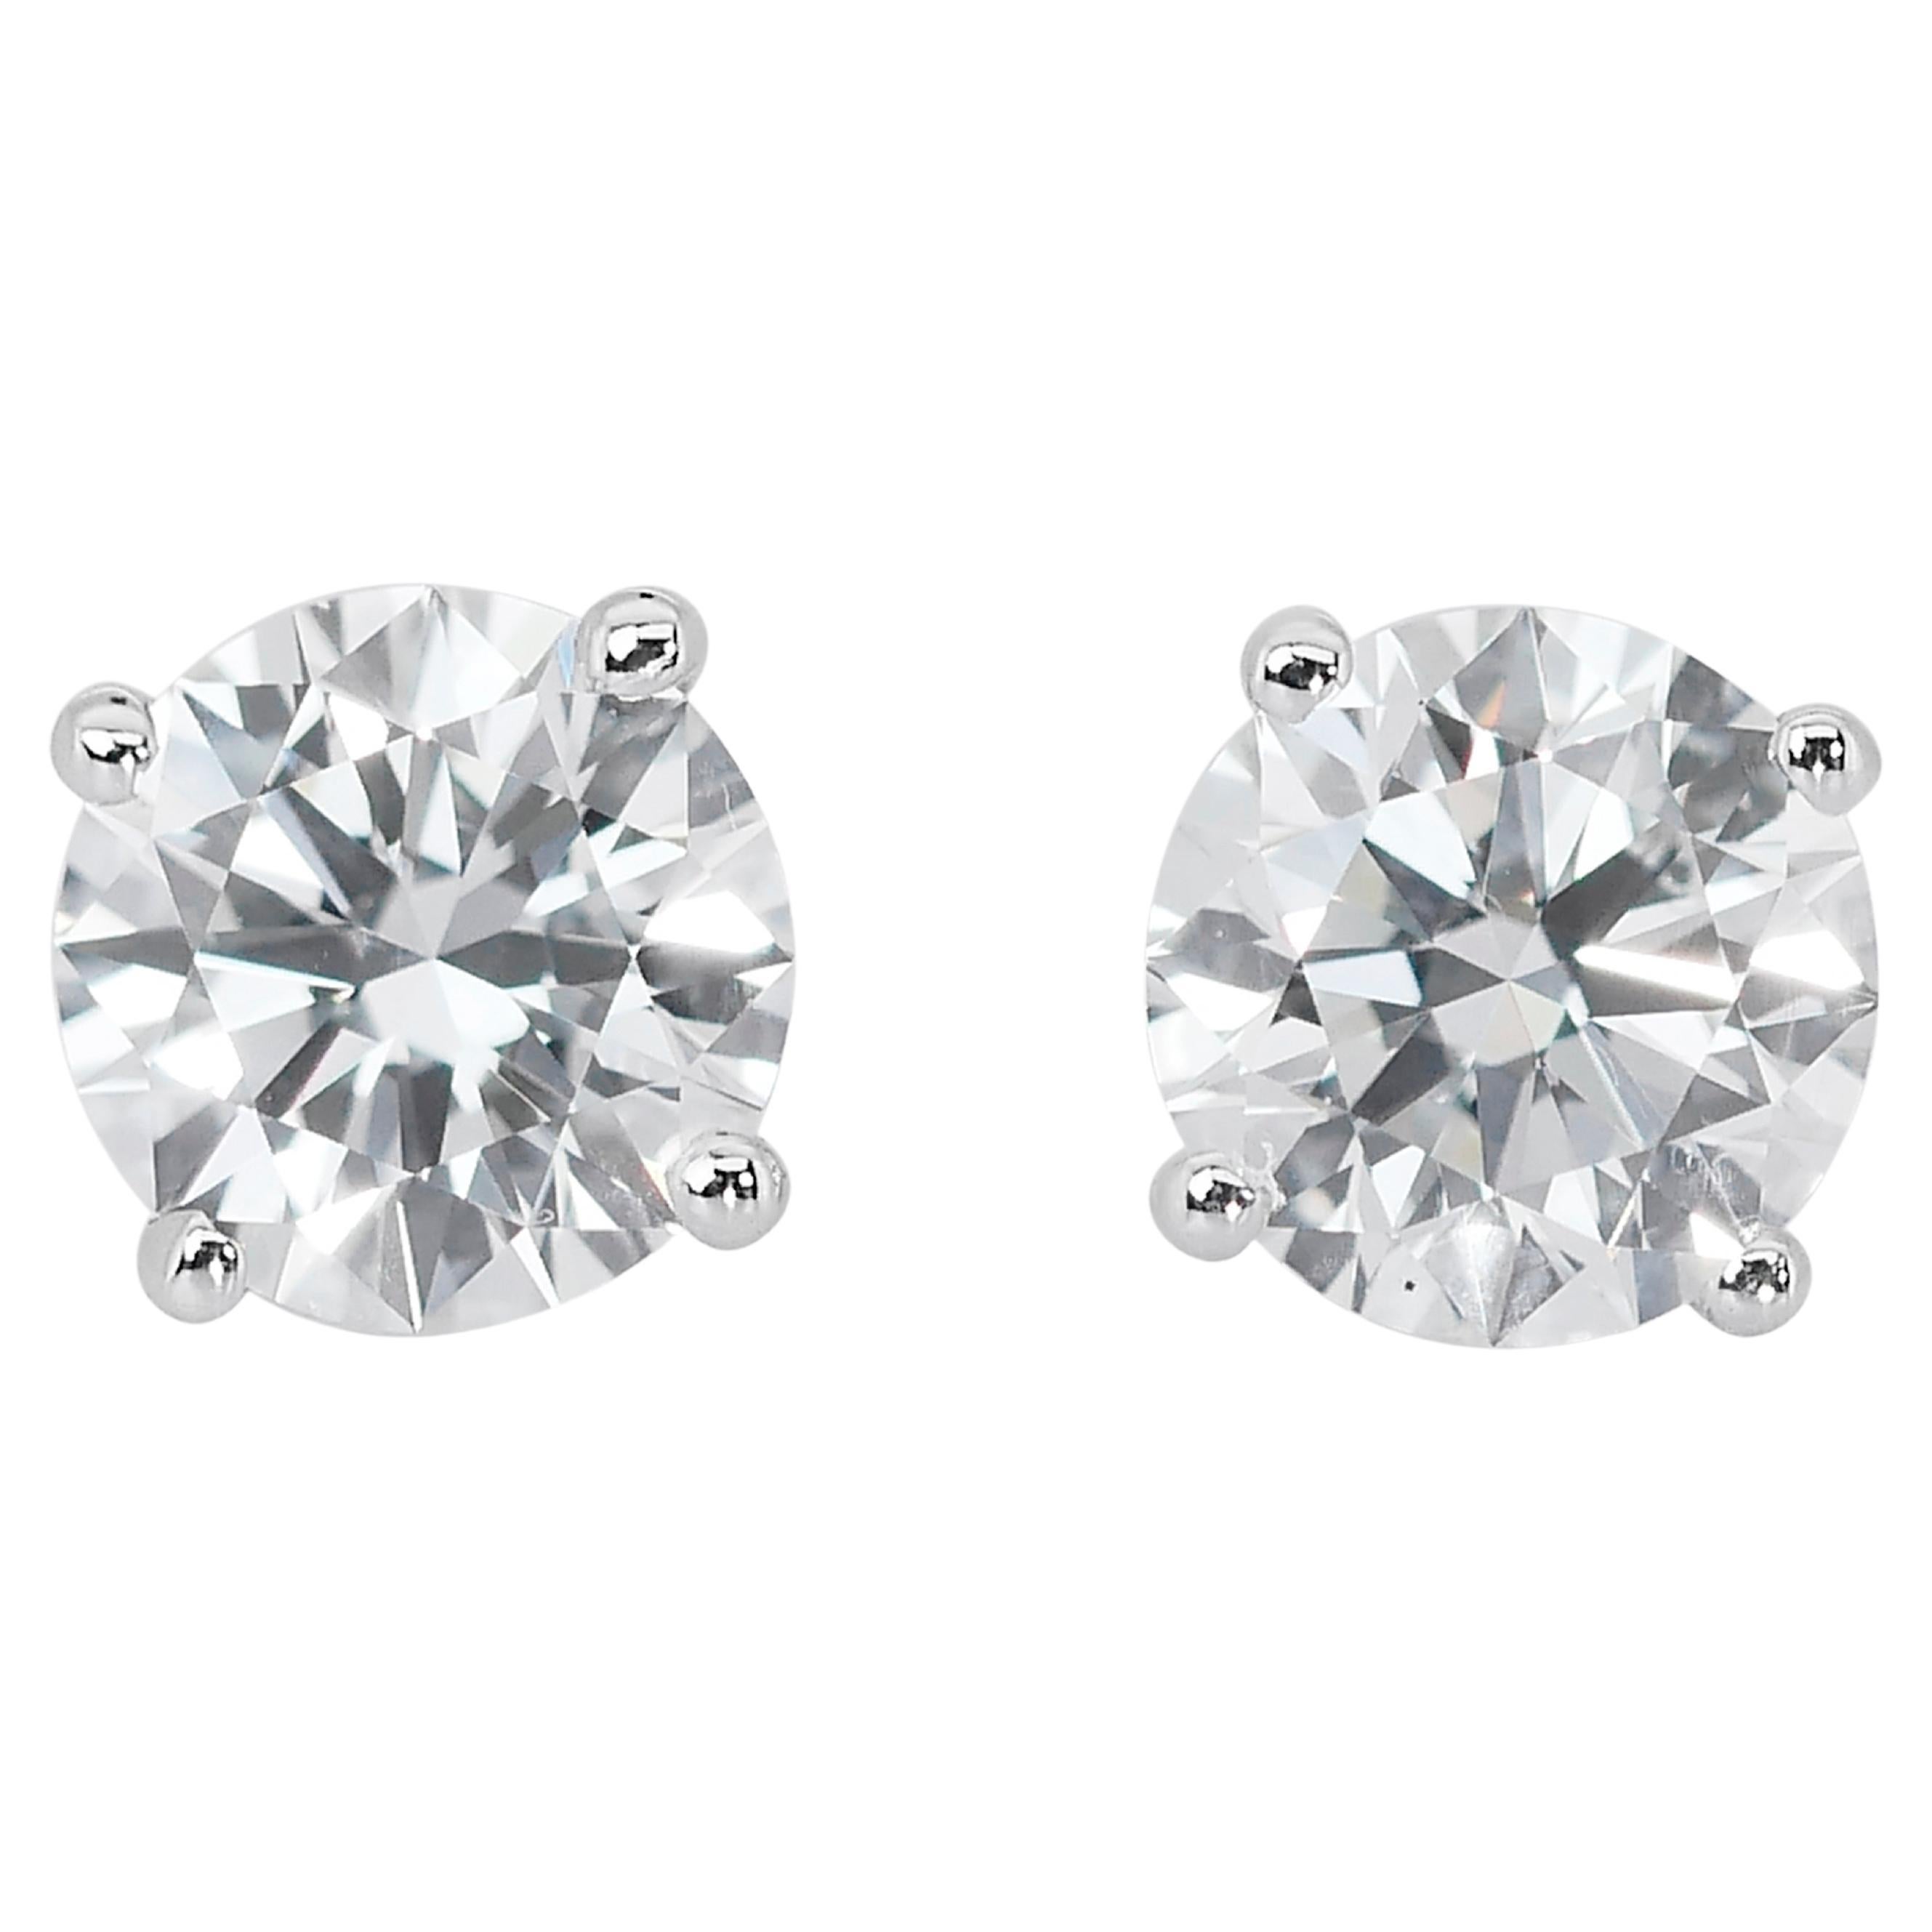 Gleaming 18k White Gold Natural Diamond Stud Earrings w/3.10 ct - GIA Certified